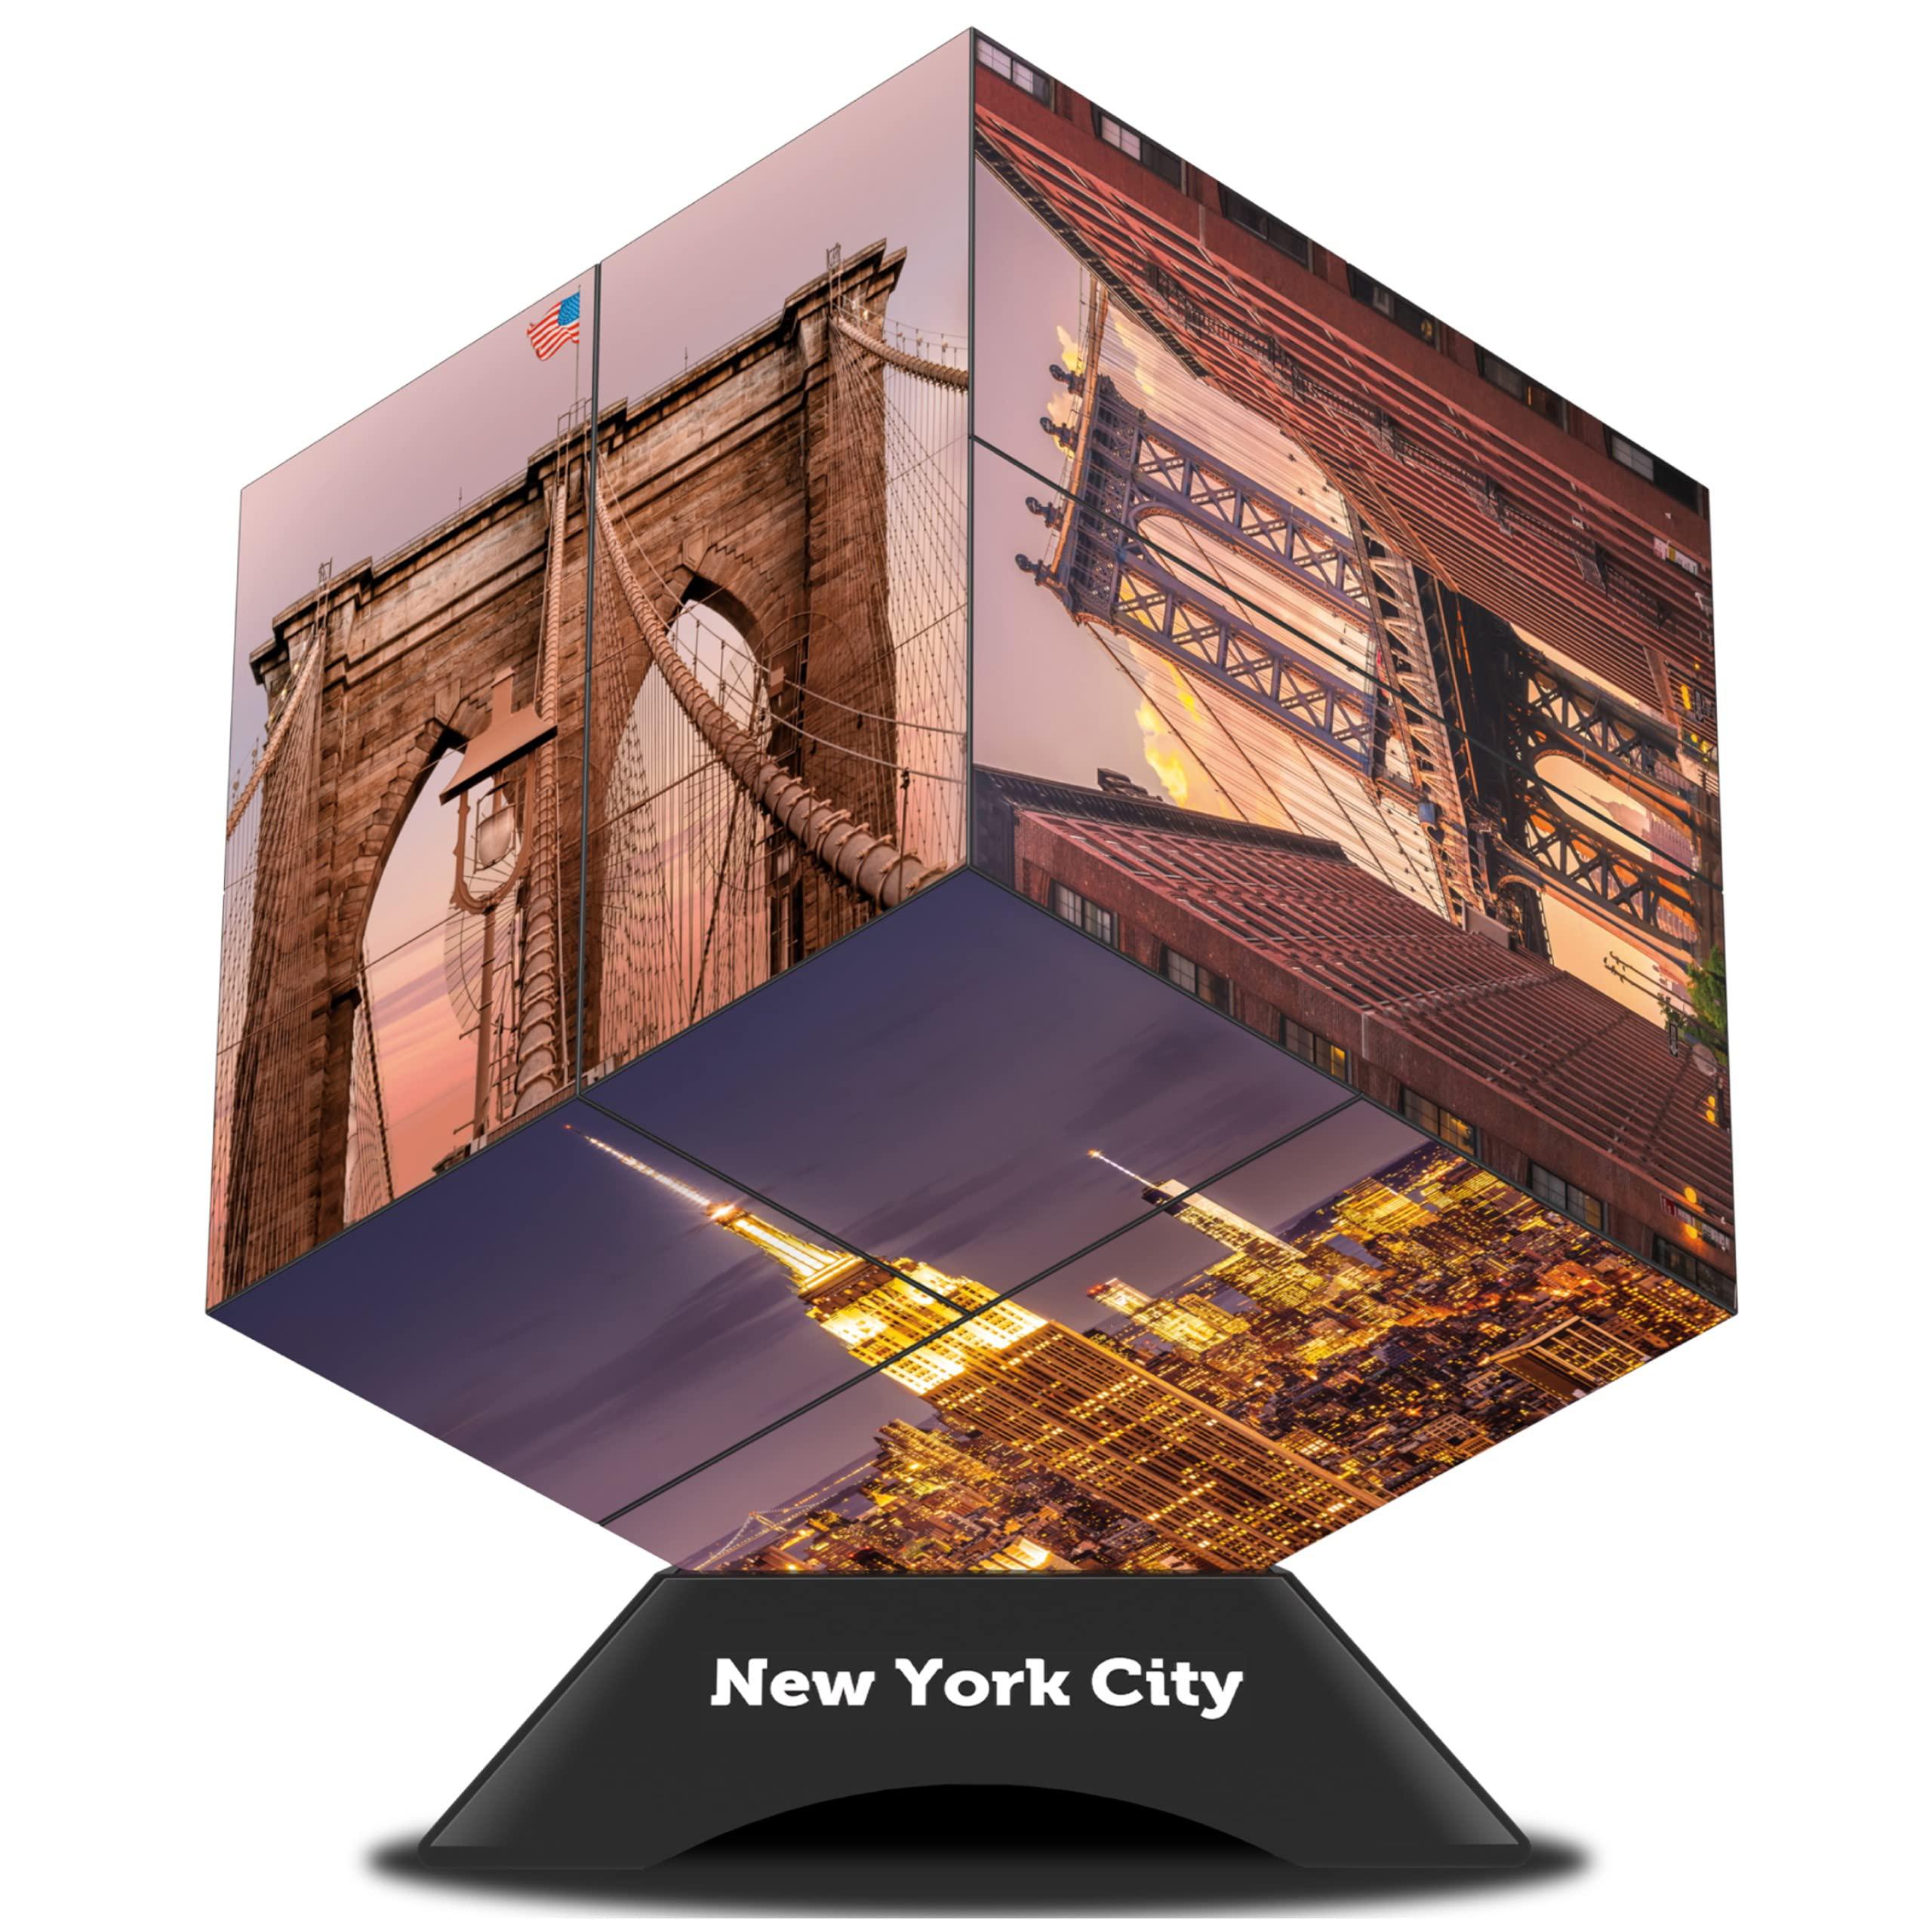 agiftcube new york city gift - folding infinity cube for nyc souvenirs - smart fidget cube with 10 new york photos, holder an